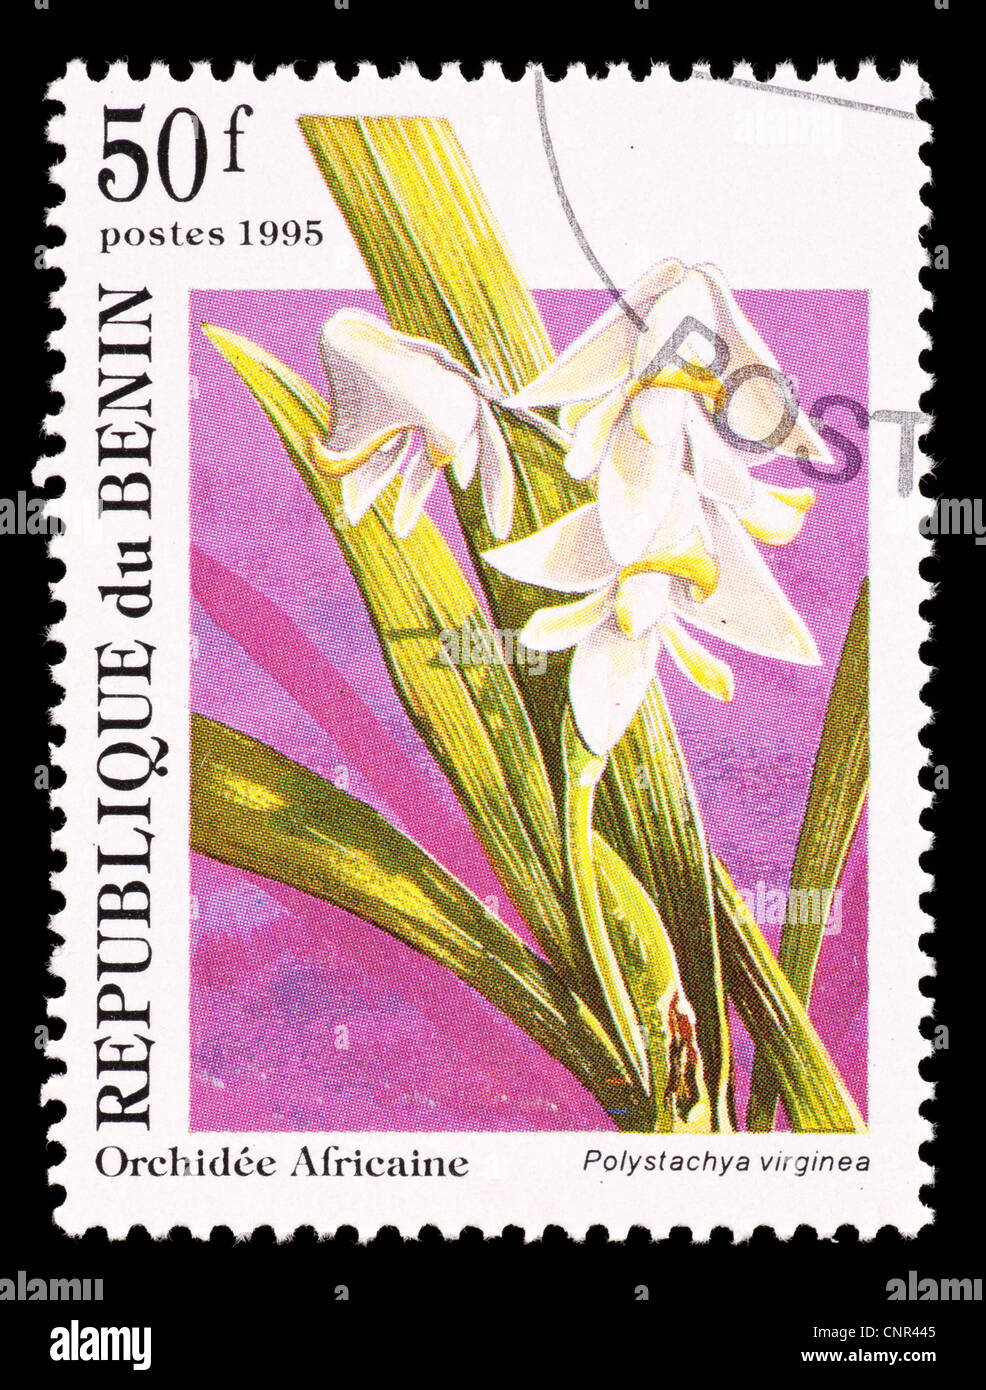 Postage stamp from Benin depicting an exotic African orchid (Polystachya virginea) Stock Photo